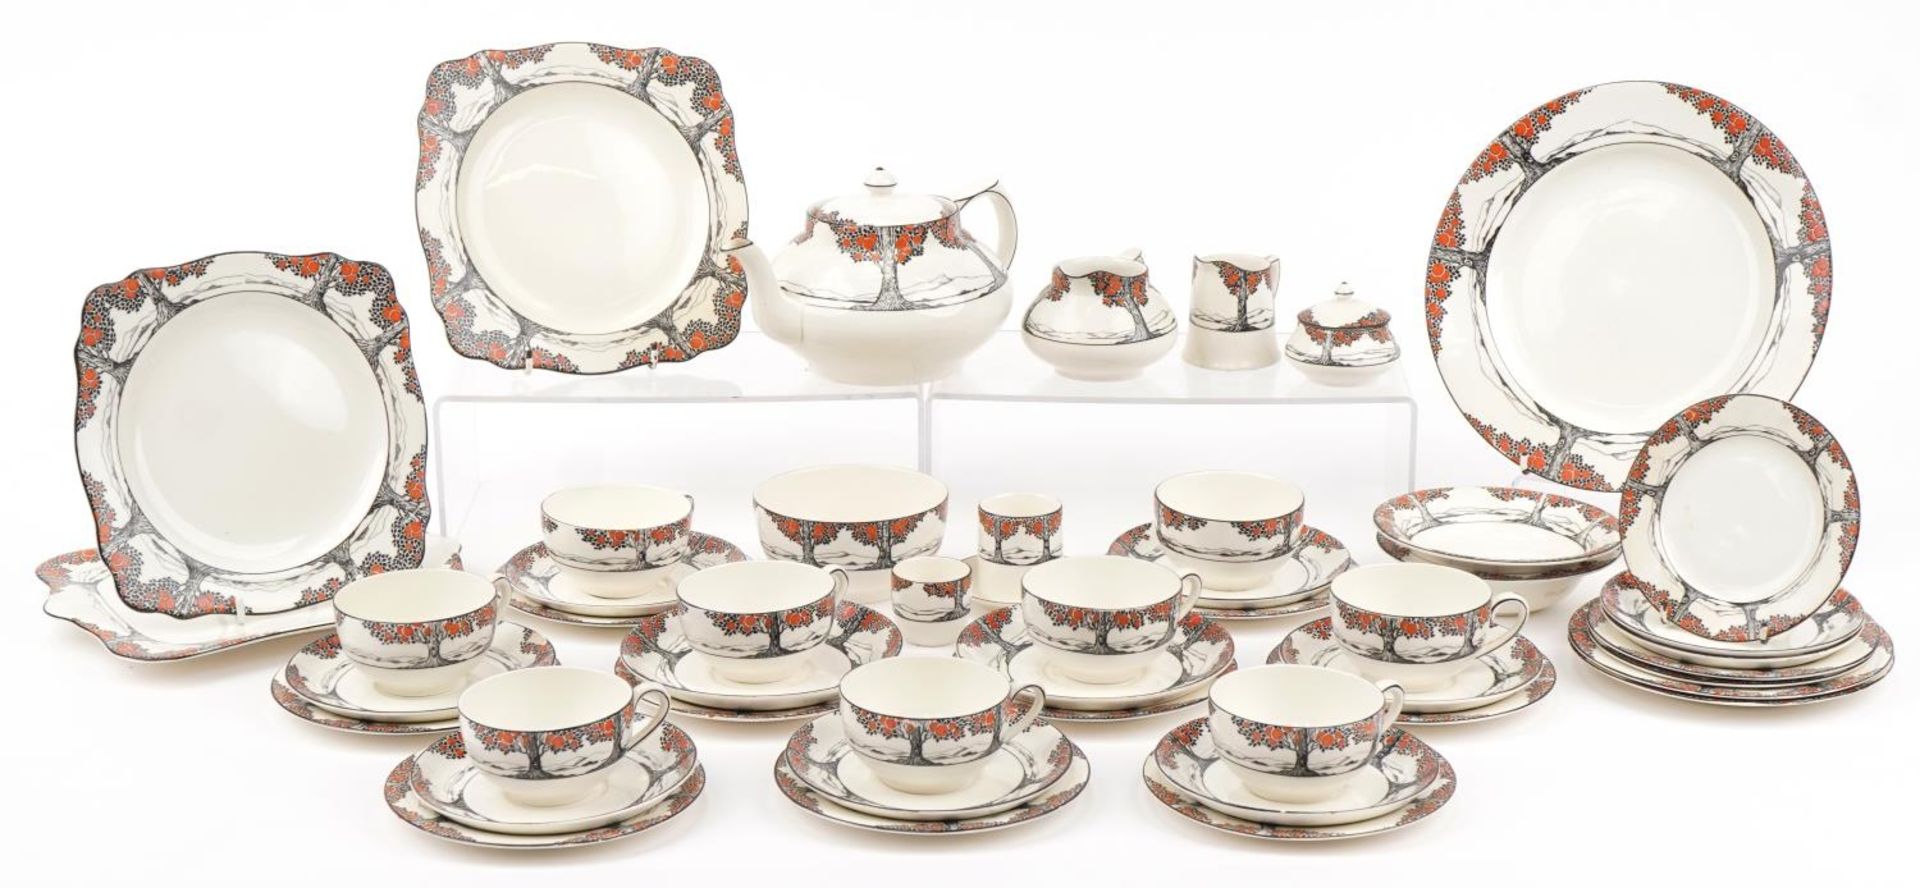 Crown Ducal Orange Tree dinnerware including teapot, cups and saucers, the largest 22.5cm in